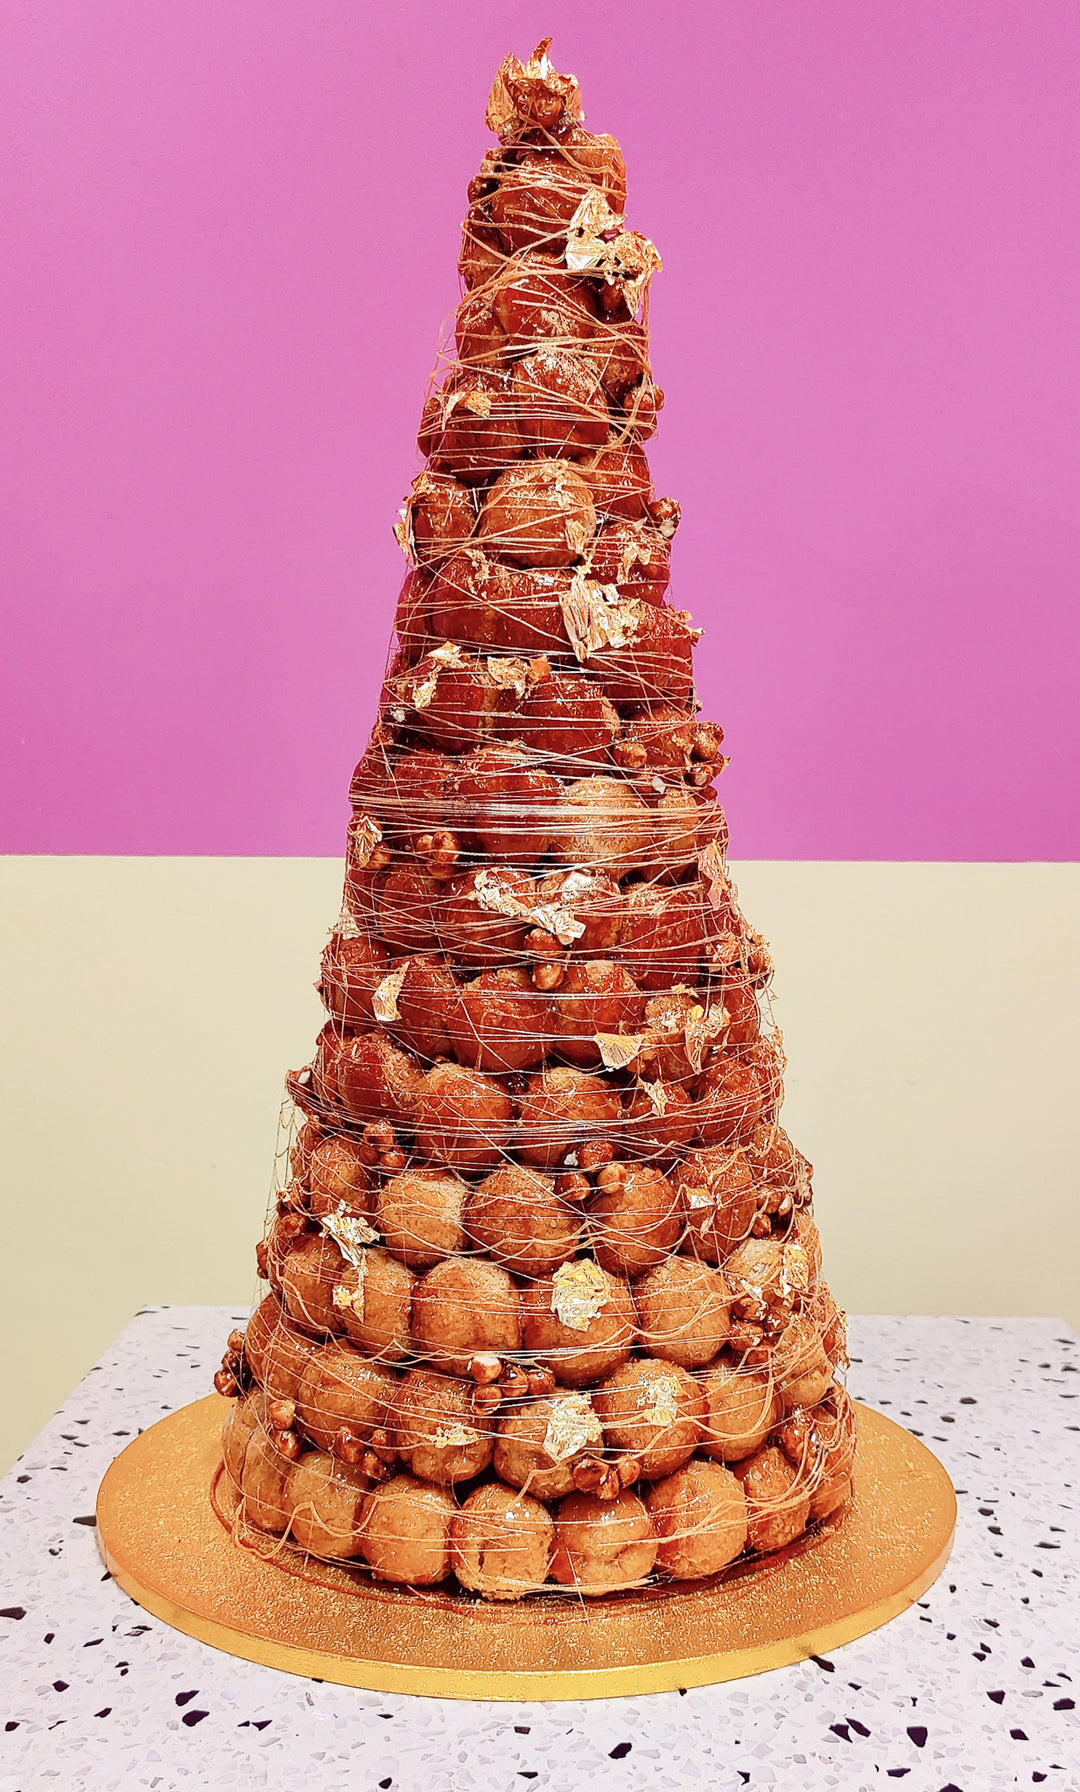 Hazelnut croquembouche with edible 24ct gold leaf